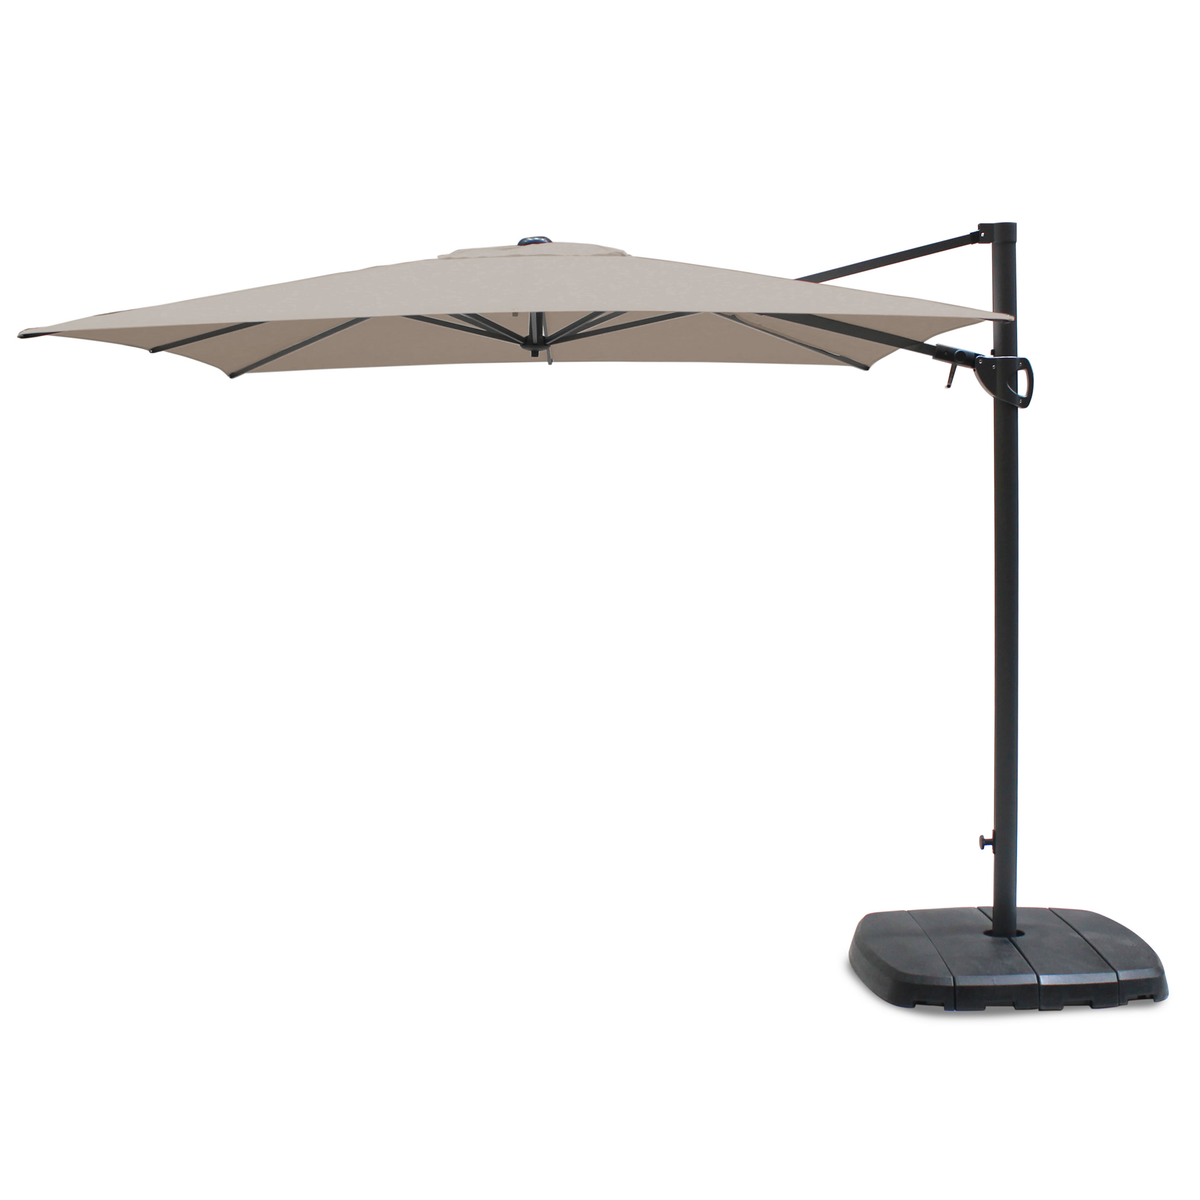 Kettler 2.5m Square Free Arm Cantilever Parasol with Base Stone